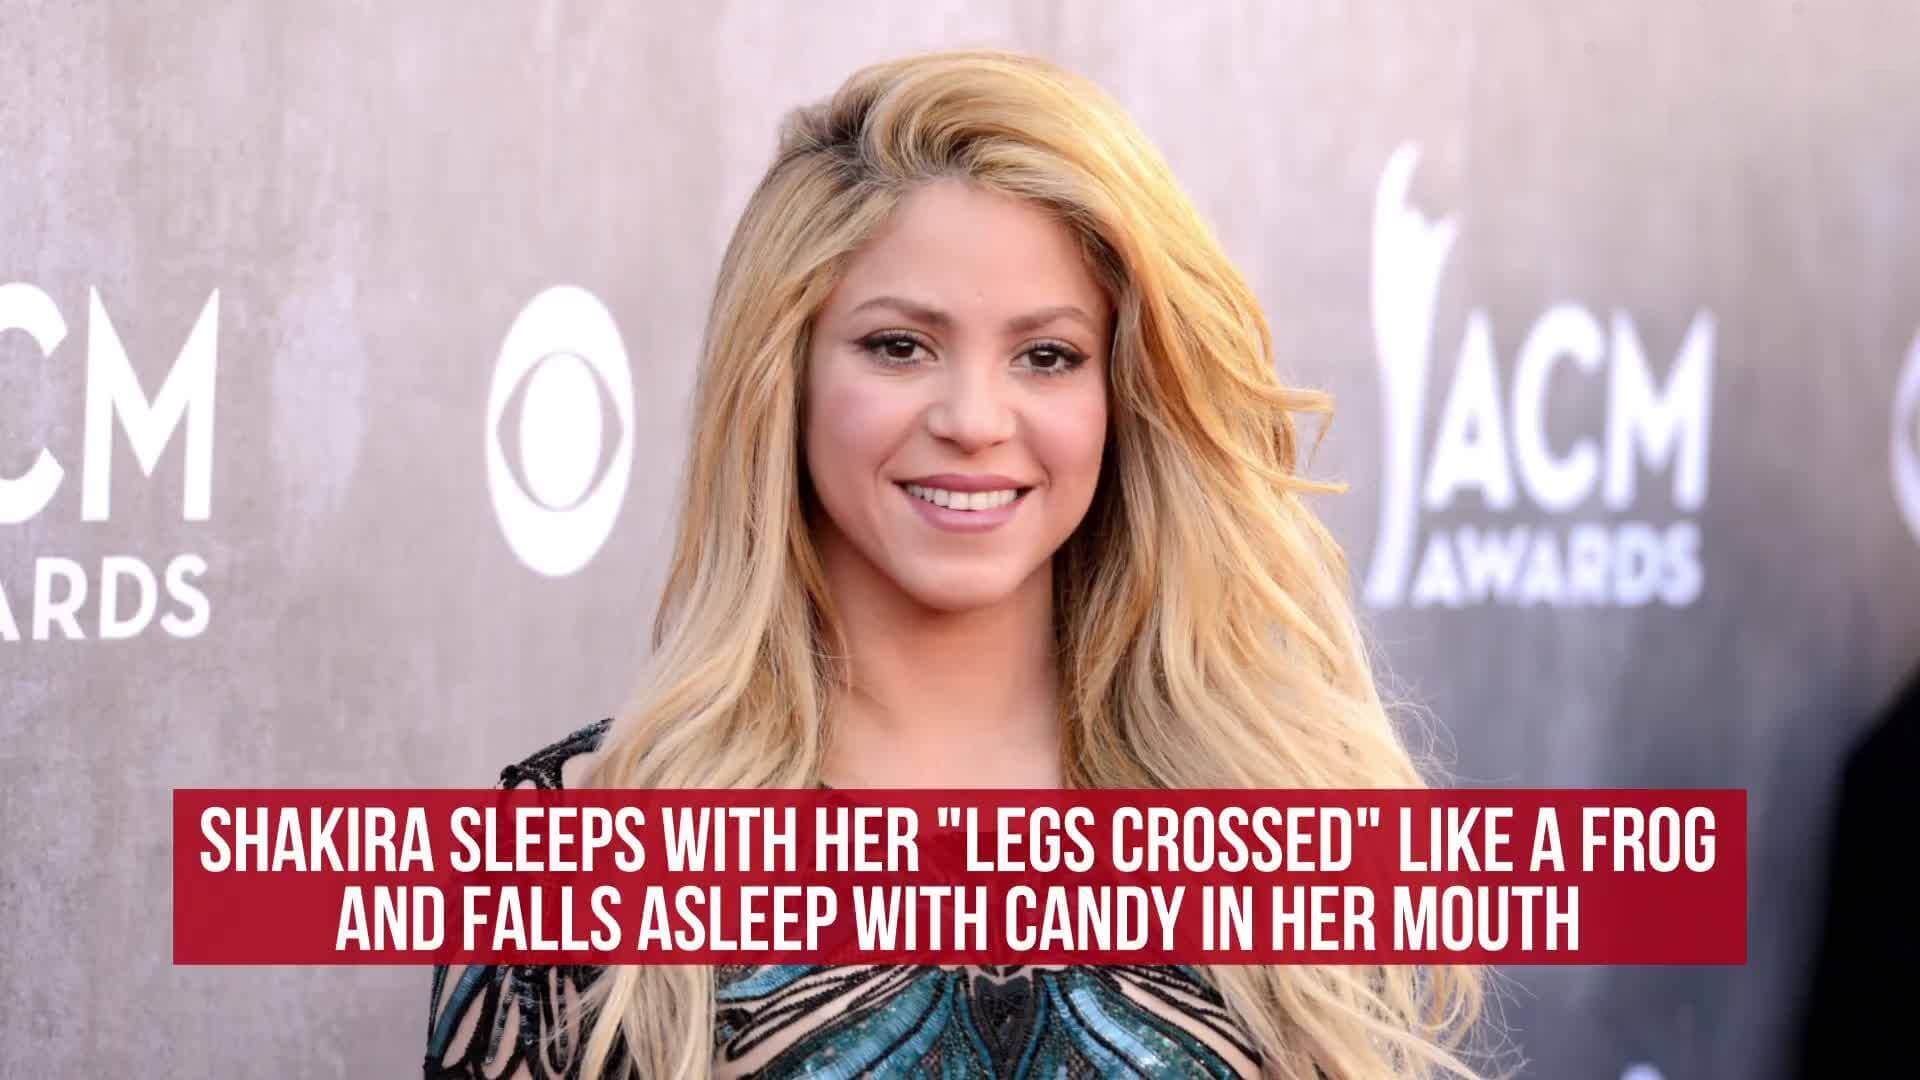 Shakira reveals unusual sleeping position and love for candy